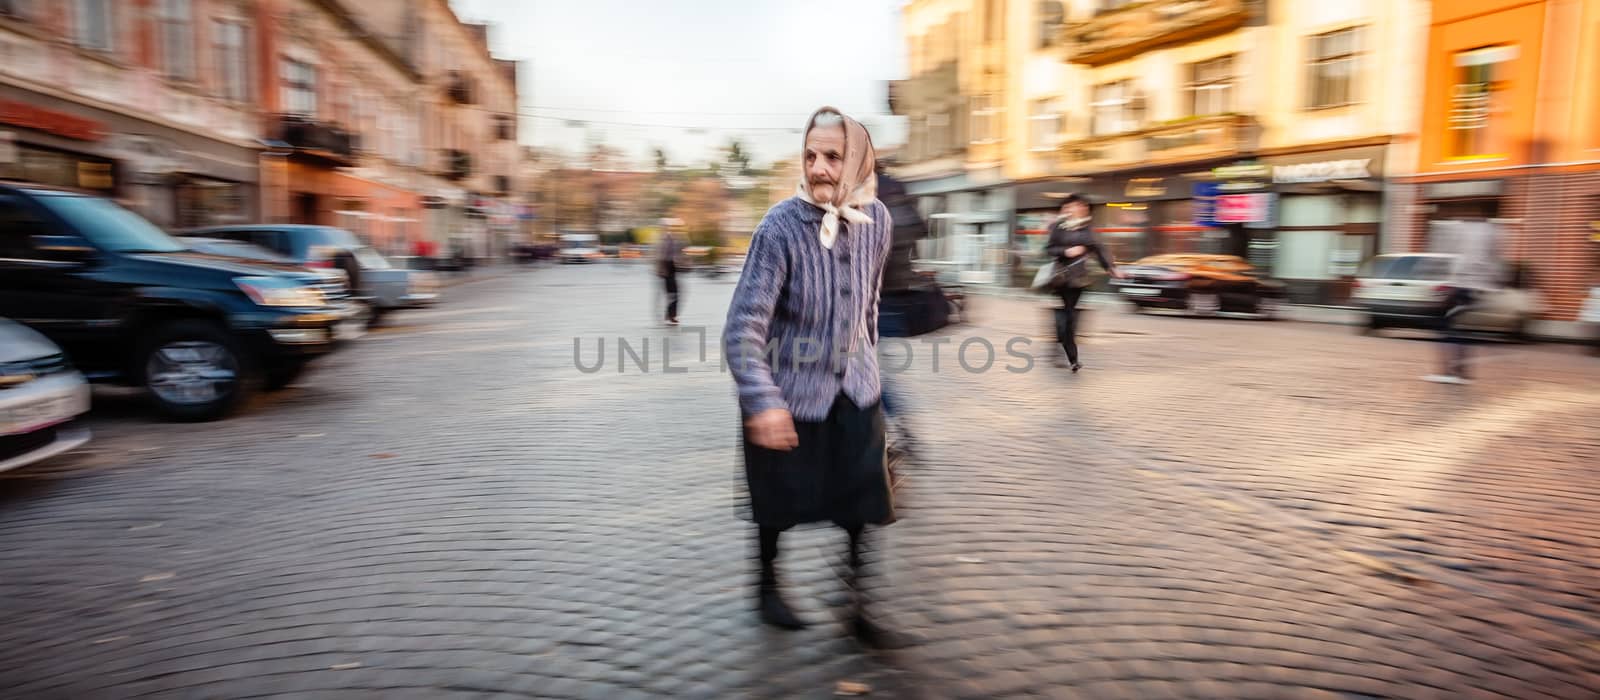 UZHGOROD, UKRAINE - OCT 25, 2013:  lonely senior woman in a shawl and wool sweater walking in a paved city square in the early morning. Intentional motion blur